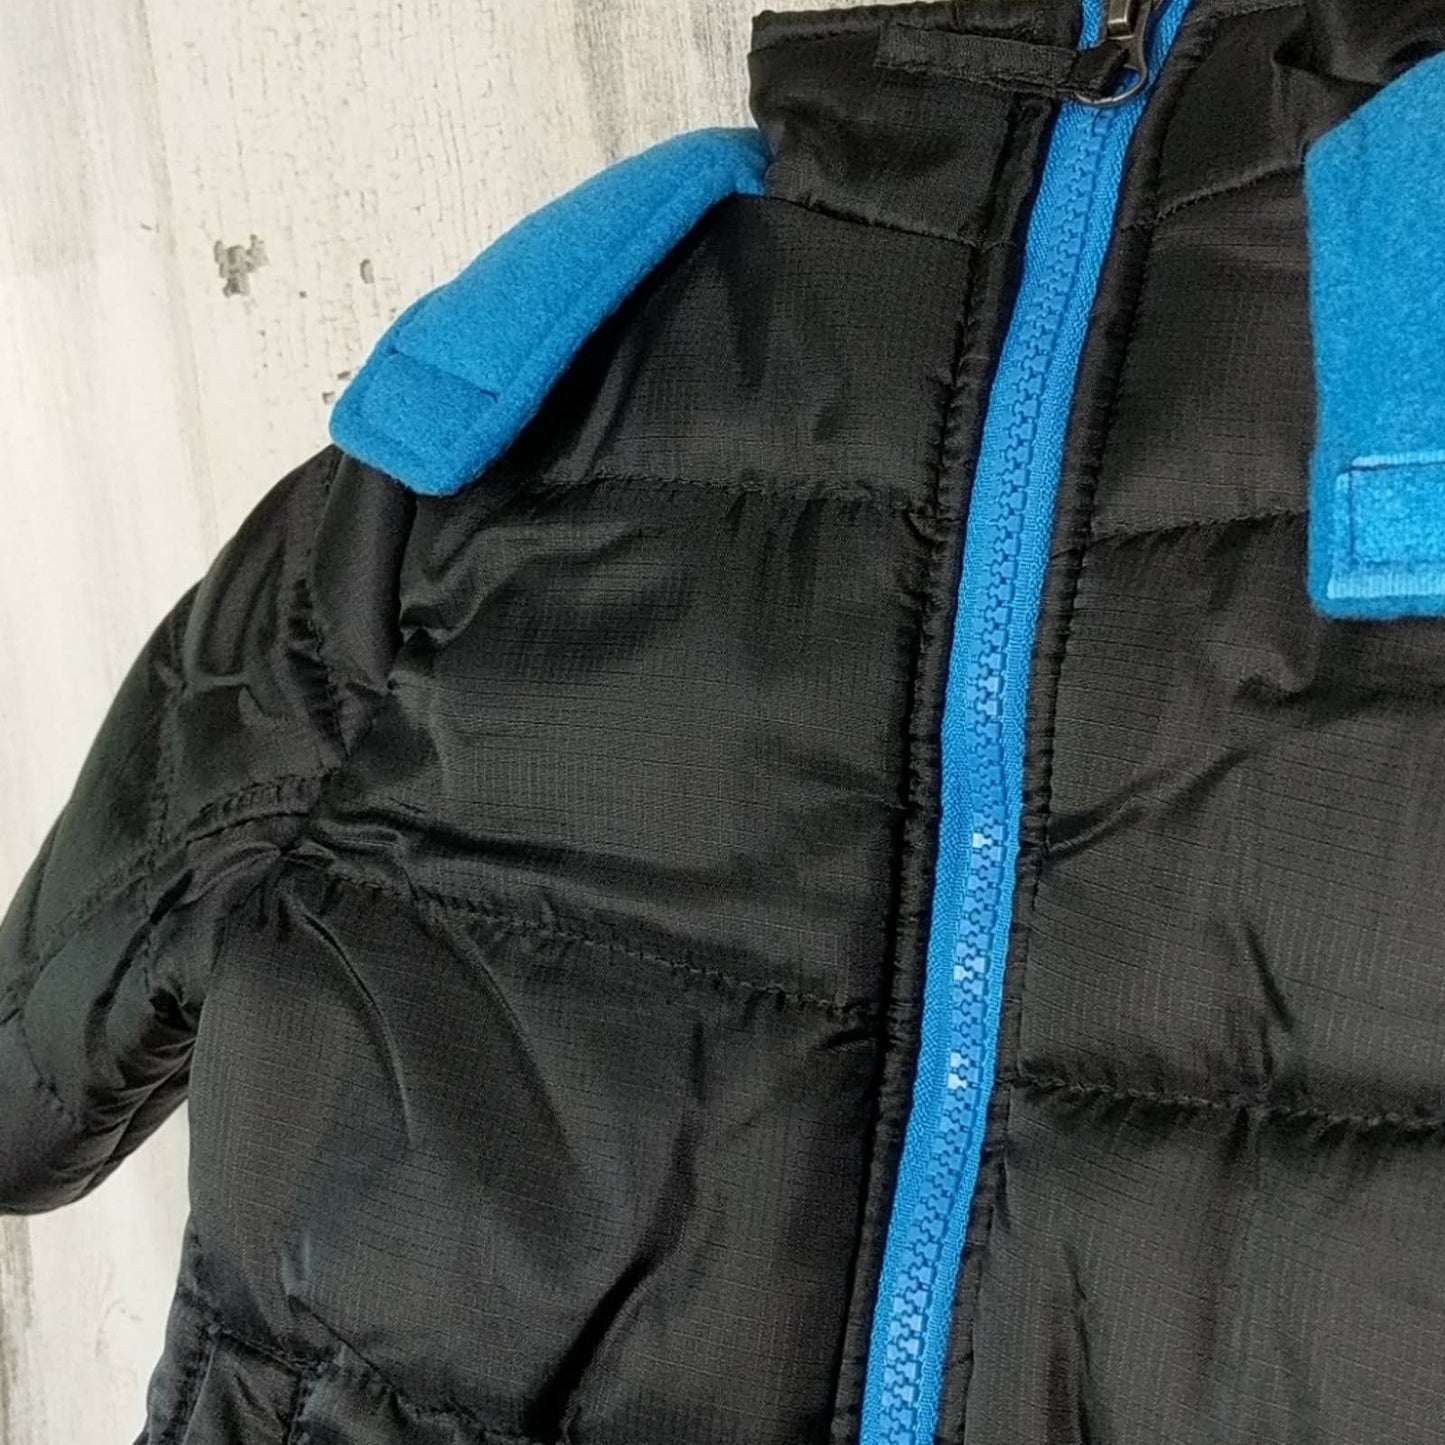 iXTREME BOYS Puffer Coat with Hood 12 Month NEW